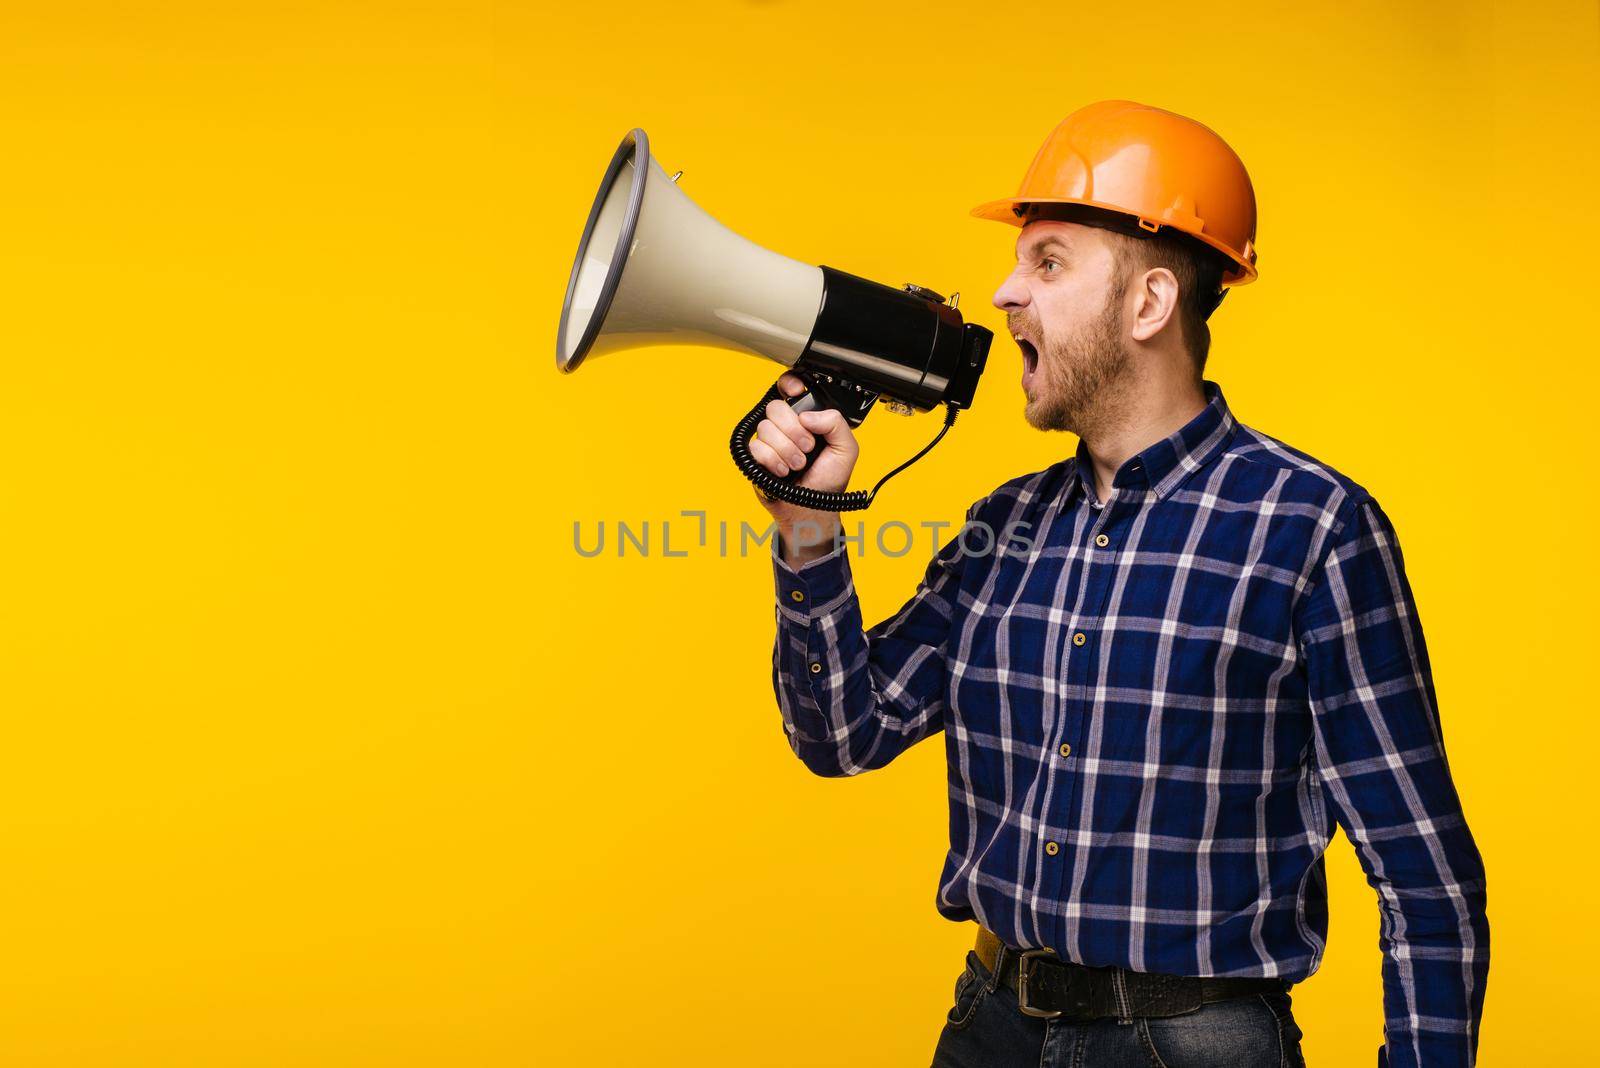 Angry worker man with a megaphone on yellow background by zartarn